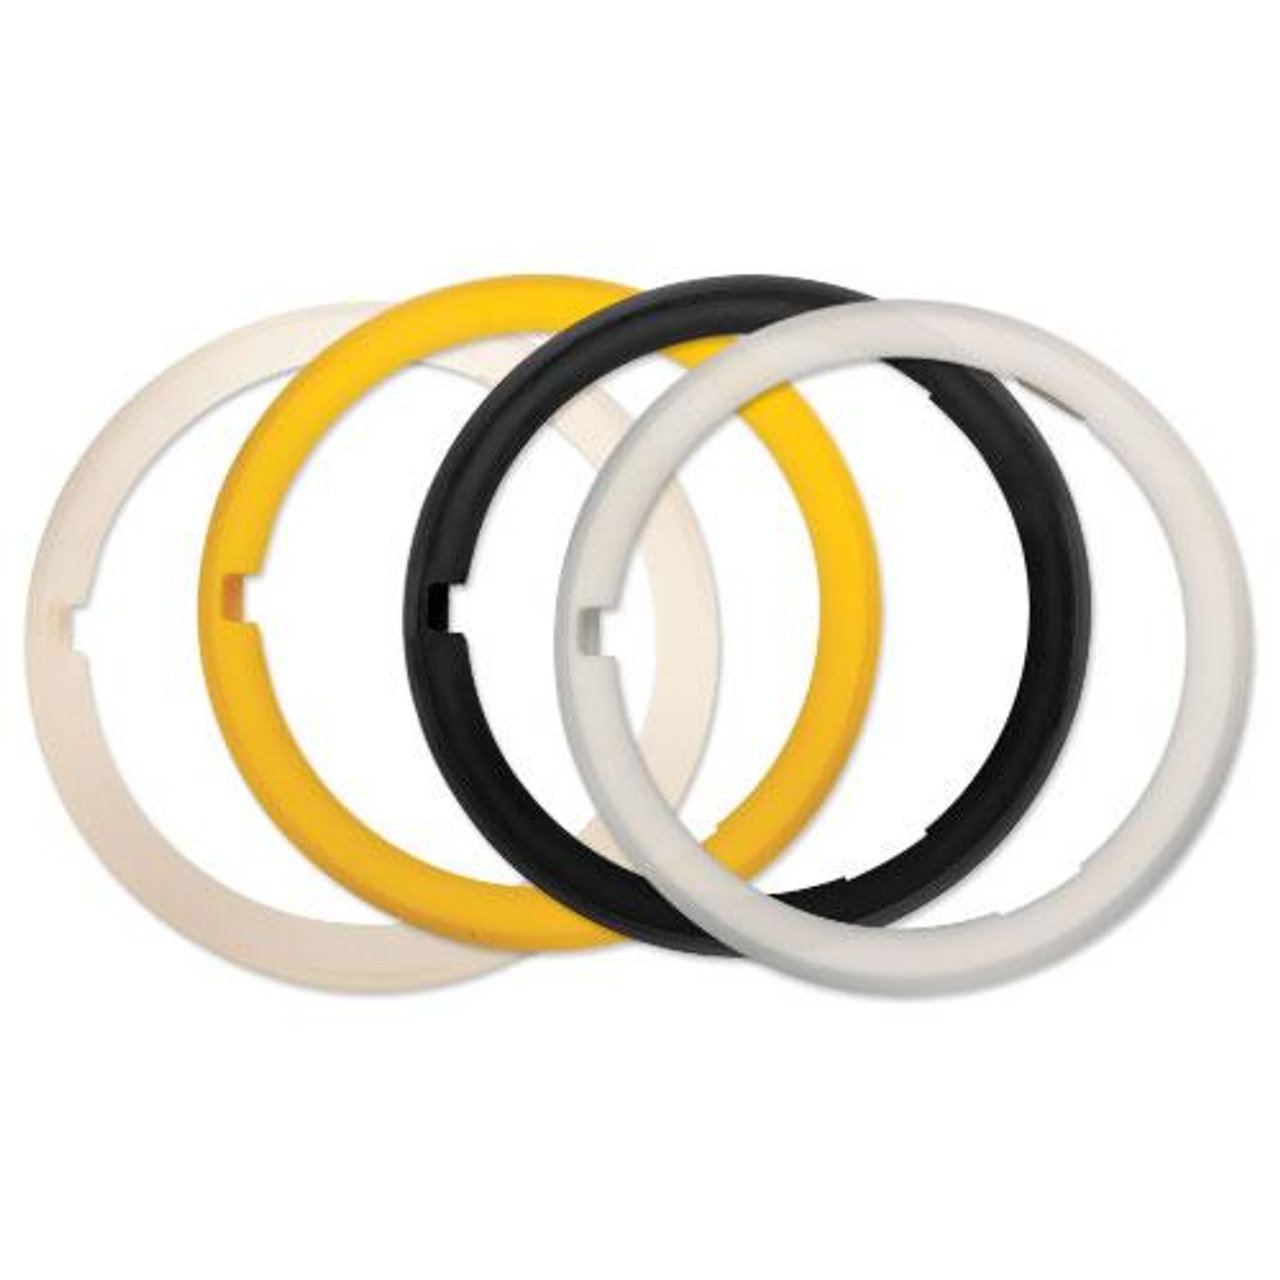 Luhr-Jensen Dipsy Diver O-Rings - Assorted